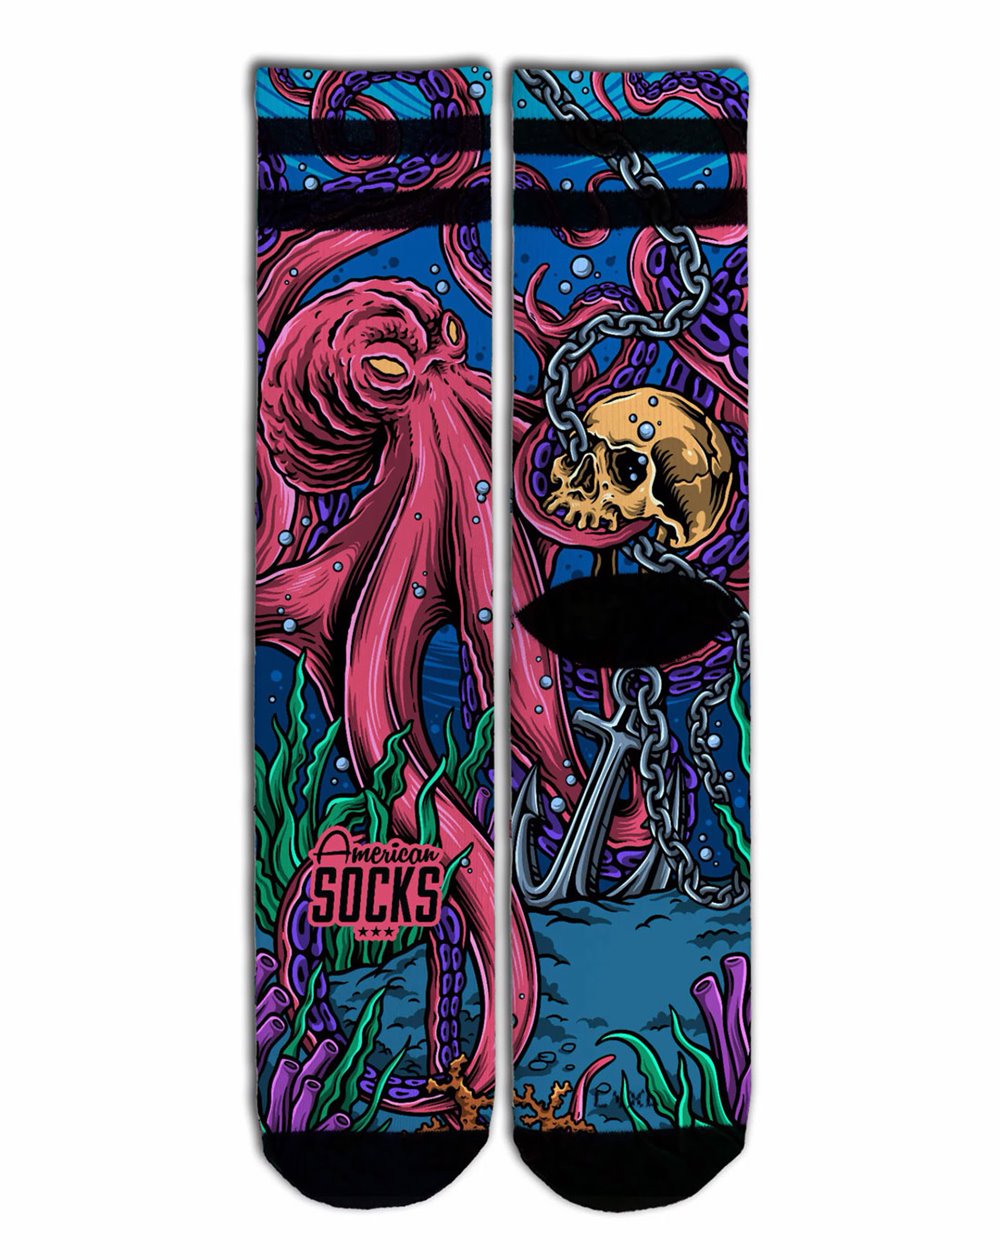 American Socks Chaussettes Skate Octopus Mixte Adulte